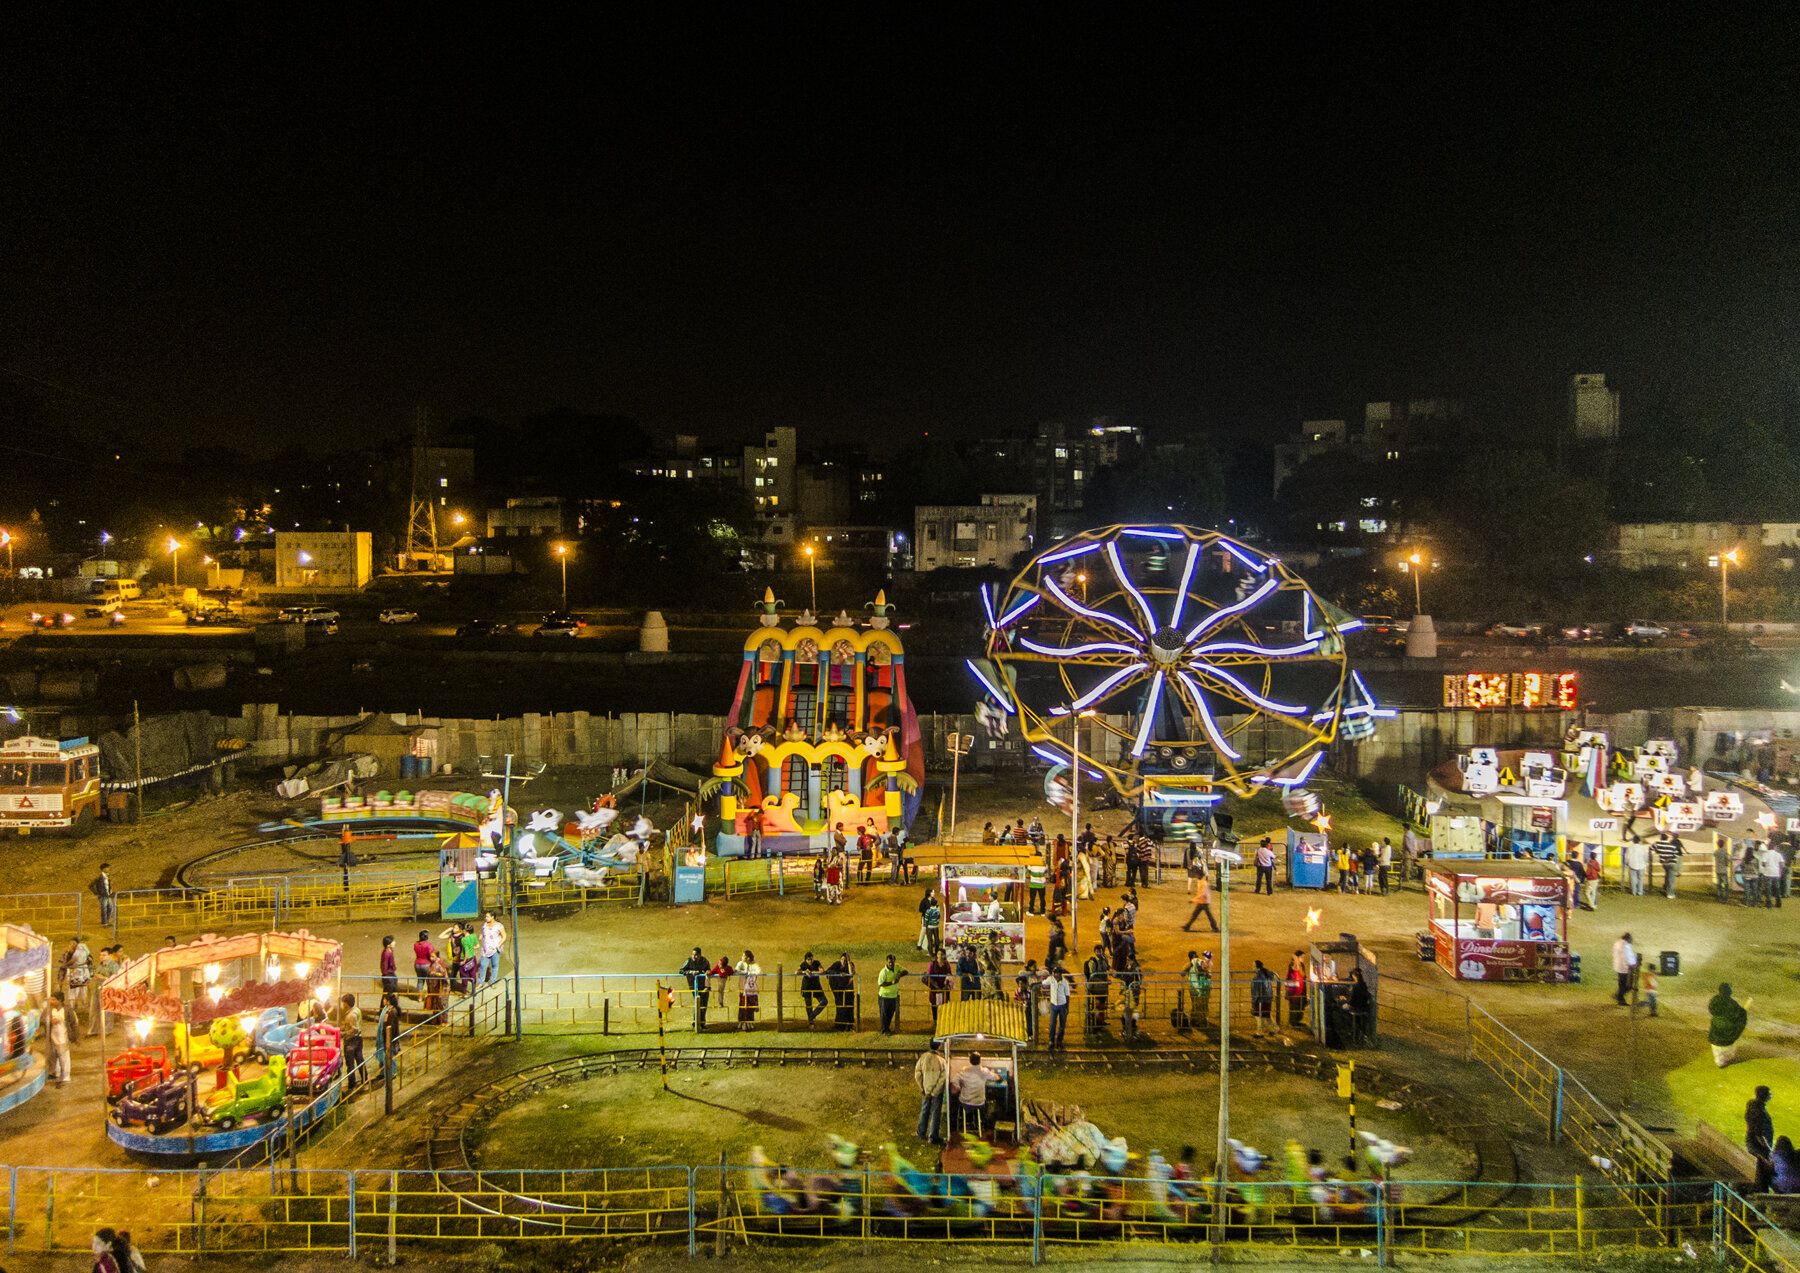 11. View of the fair from above | From the series Manoranjan Nagri | 2012 | IMG_7482.jpg